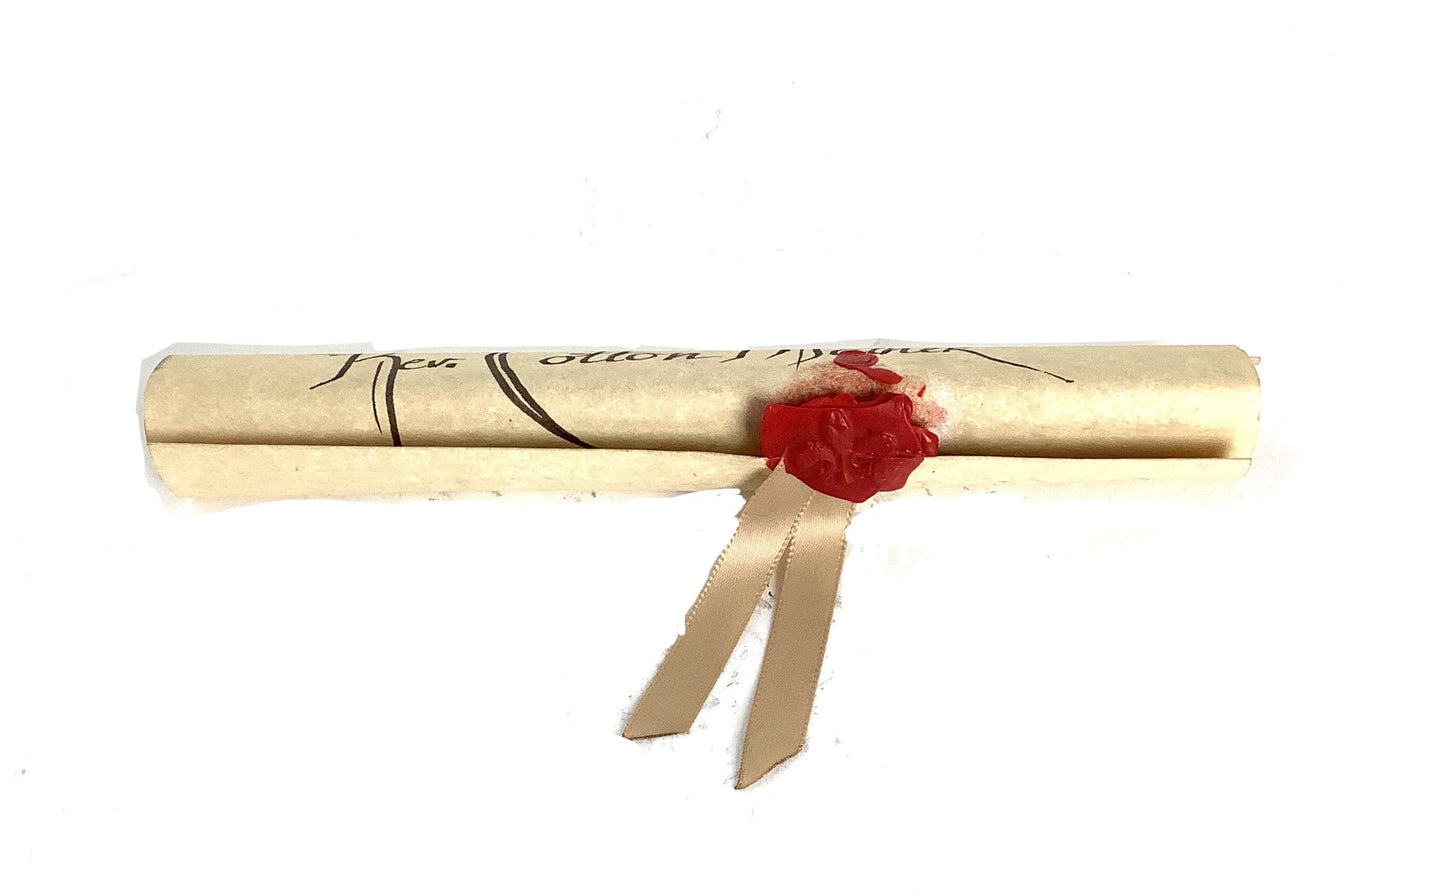 Salem: Cotton's Rolled Up Letter with Wax Stamp